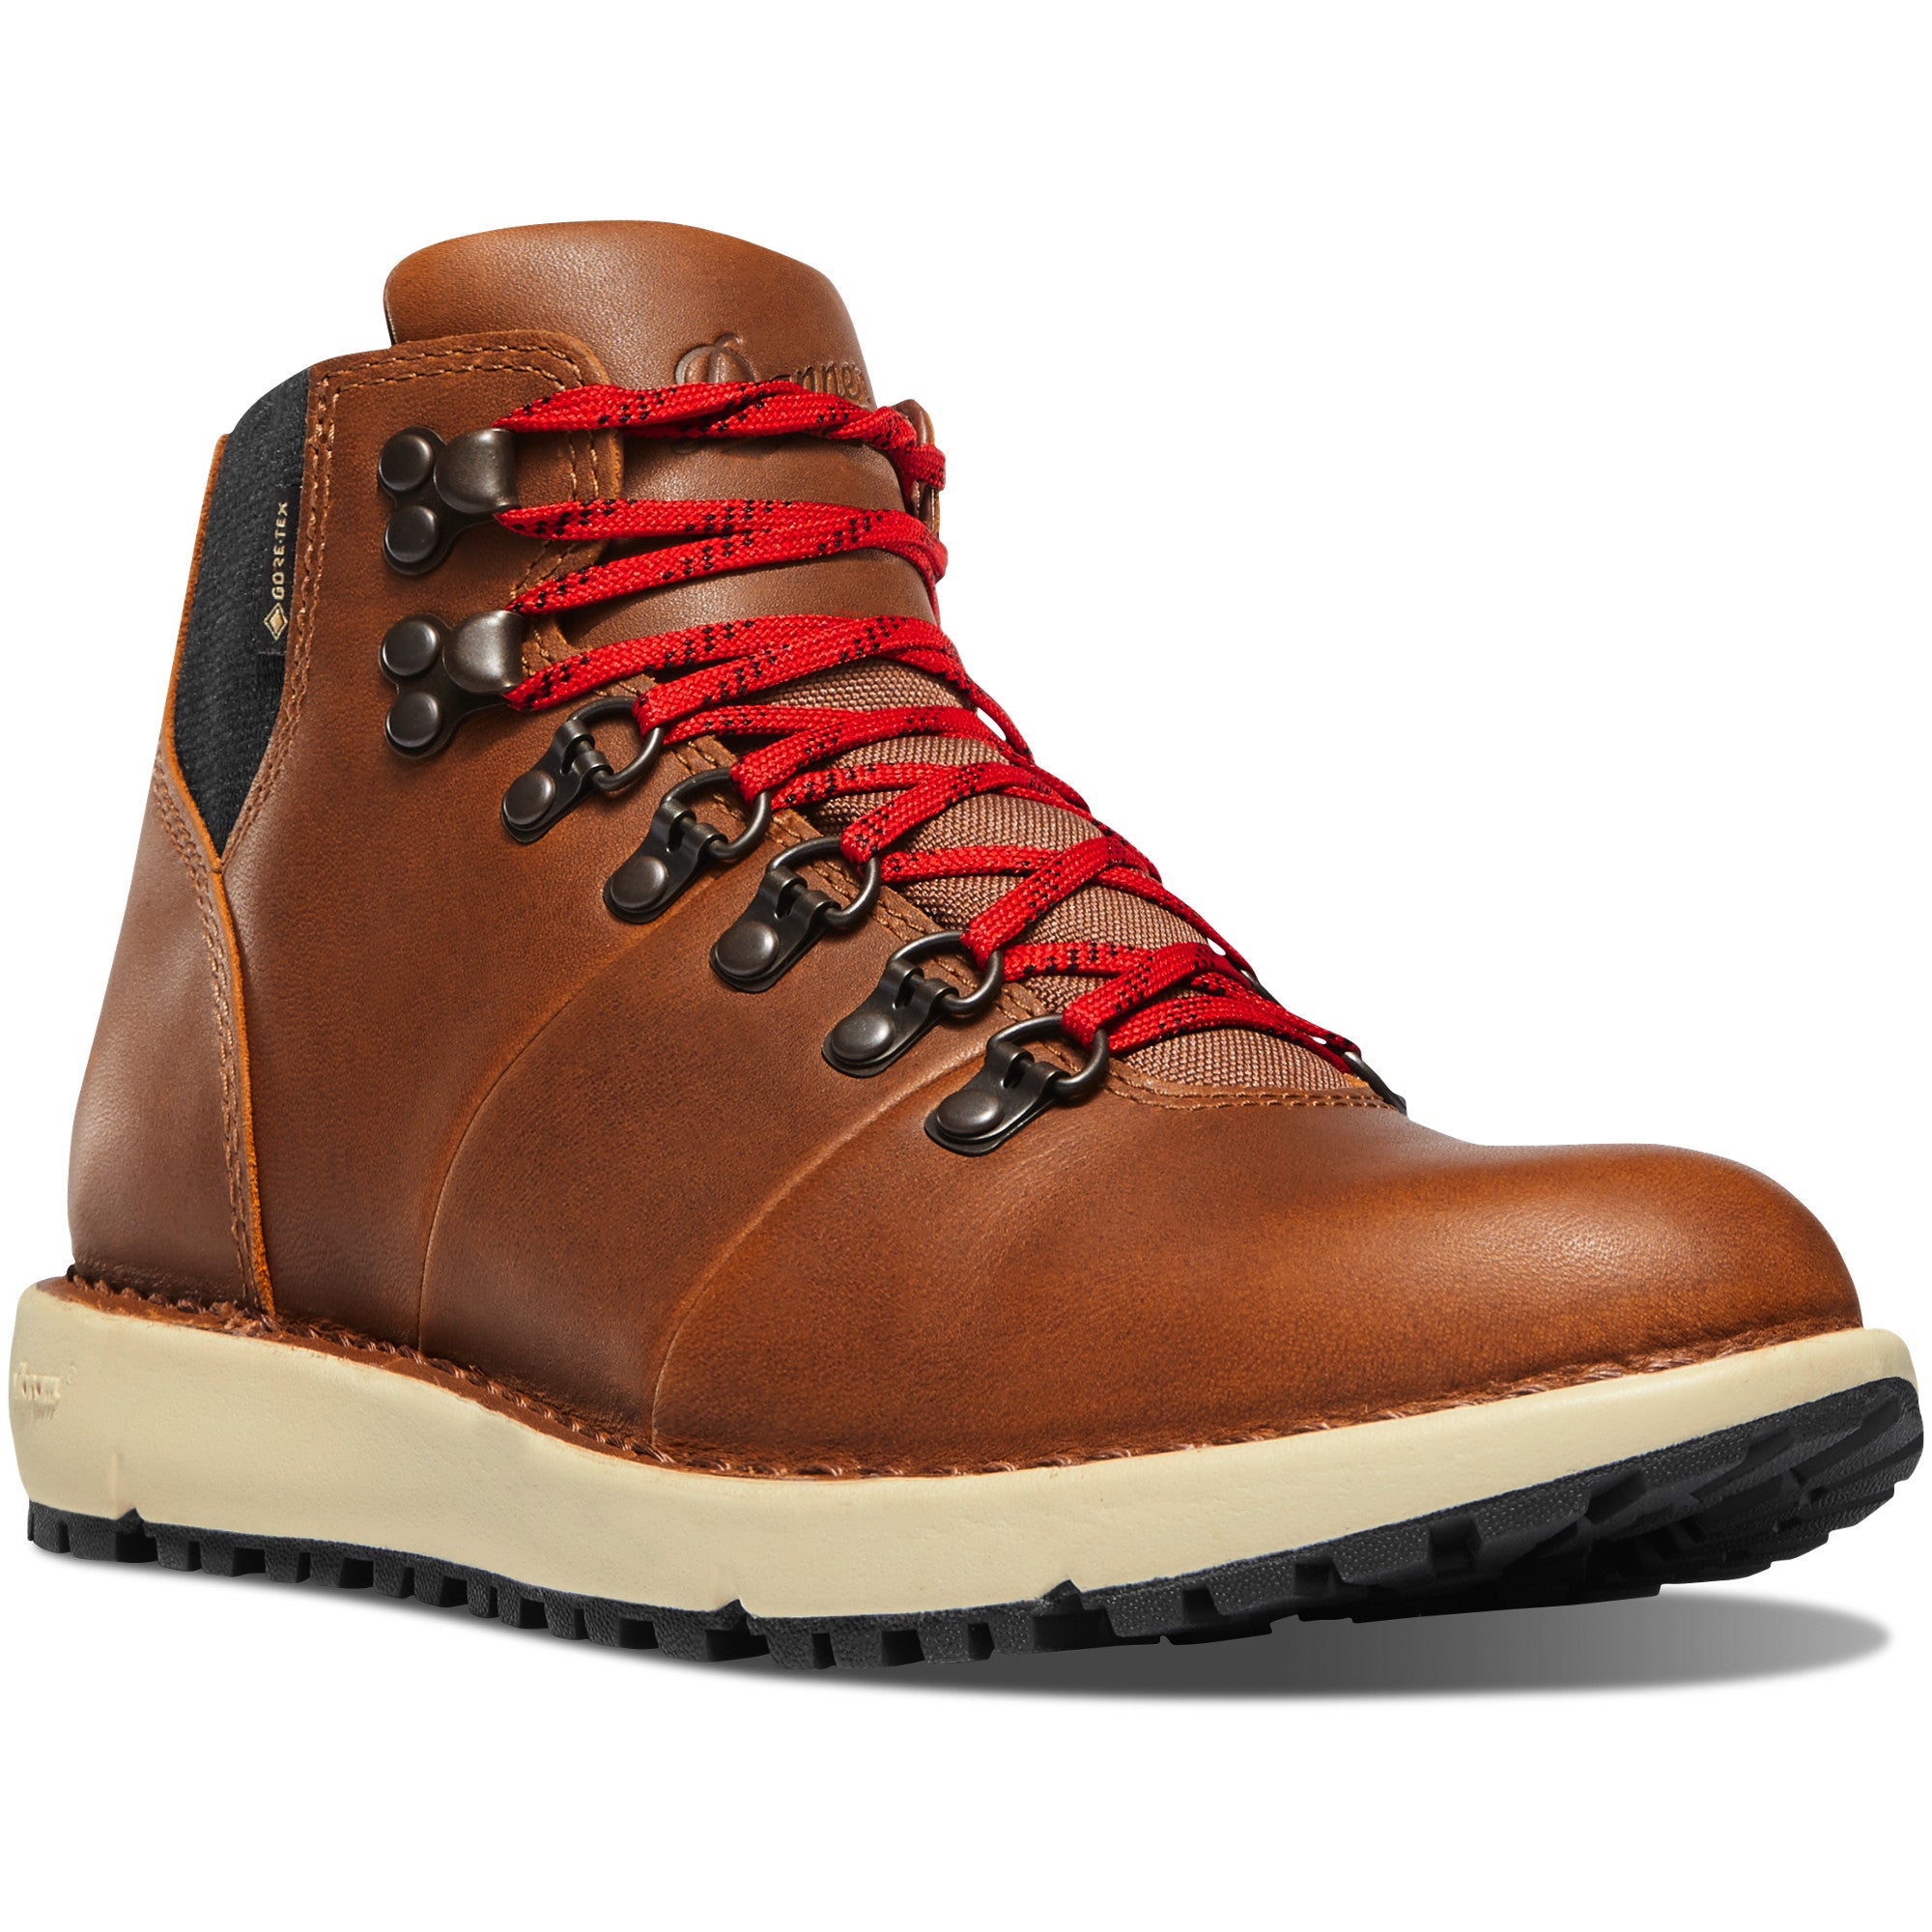 Women's Danner Vertigo 917 Lifestyle Boot in Cathay Spice color from the side view